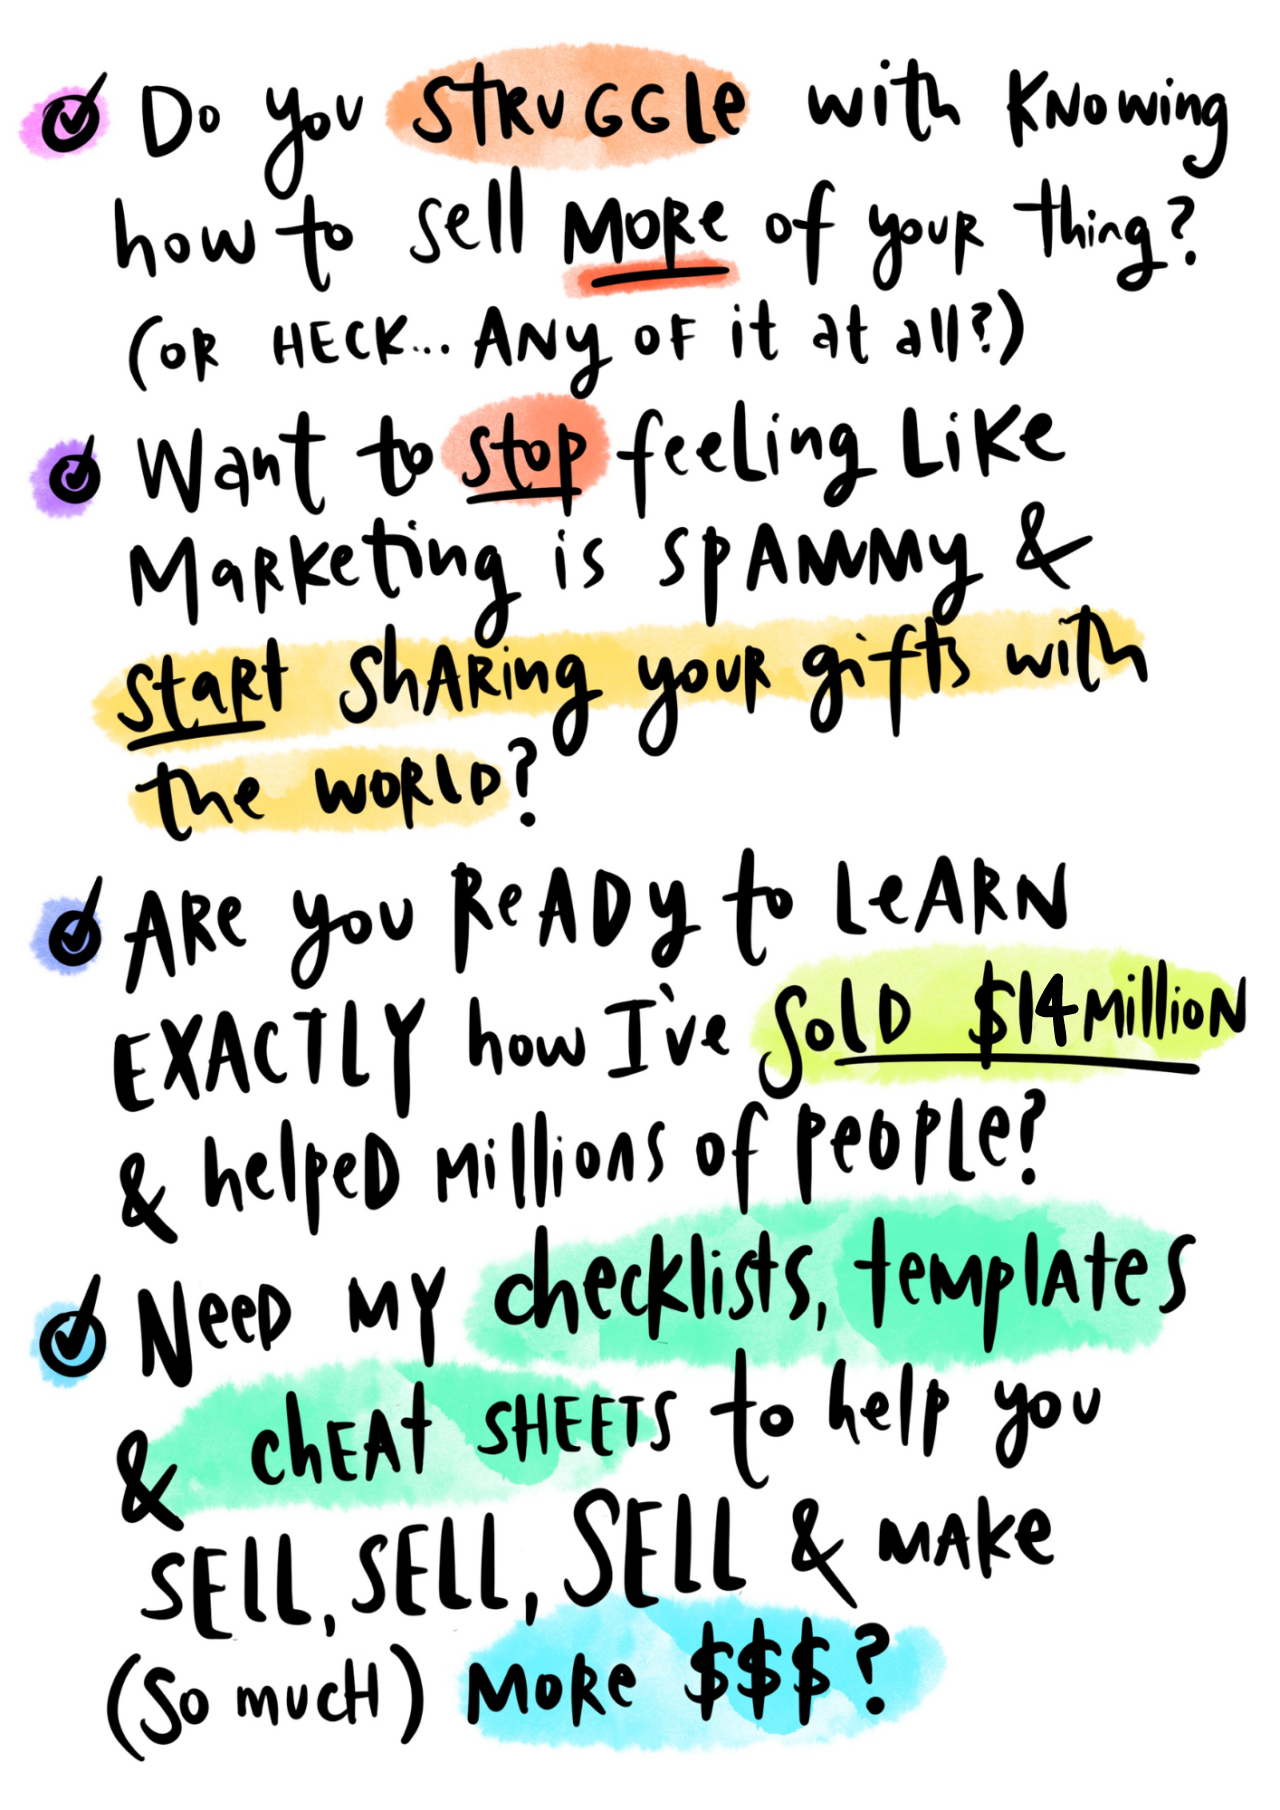 a handwritten style bullet point with periodic highlights of watercolor paint background  and a list of text that says the following<br />
- Do you struggle with knowing how to sell more of your thing? (or HECK... any of it at all?)<br />
- Want to stop feeling like marketing is spammy & start sharing your gifts with the world?<br />
- Are you ready to learn exactly how I've sold $14million & helped millions of people?<br />
- Need my checklists, templates & cheat sheets to help you SELL, SELL, SELL & Make (so much) more $$$?